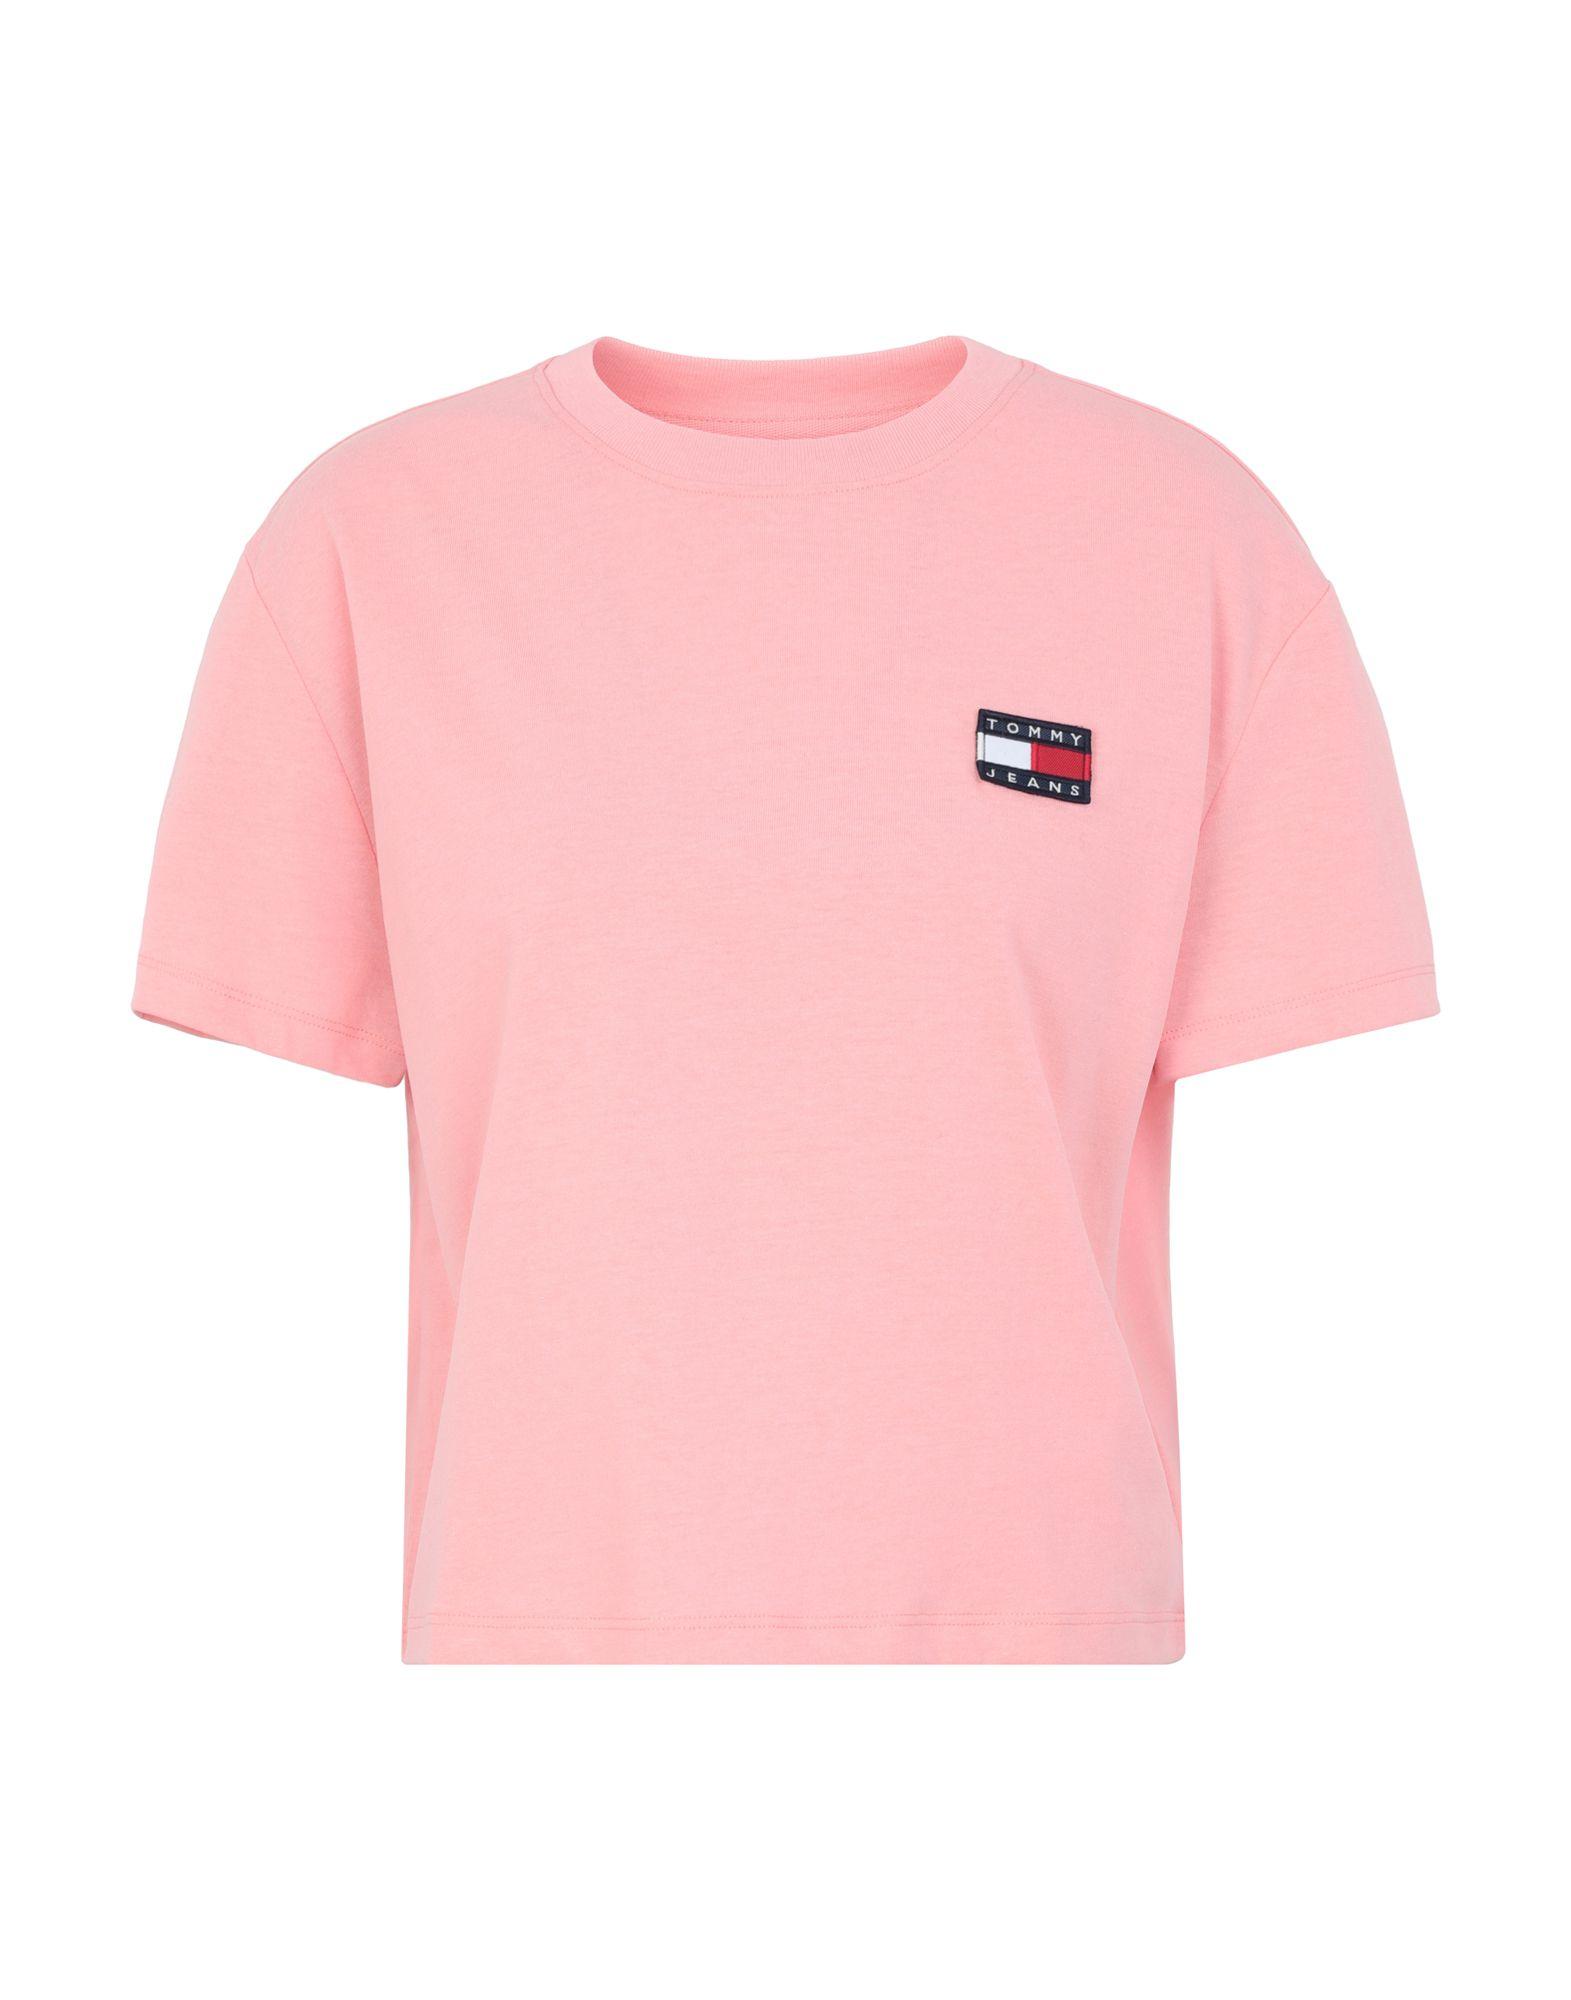 Tommy Hilfiger Cotton T-shirt in Light Pink (Pink) - Lyst